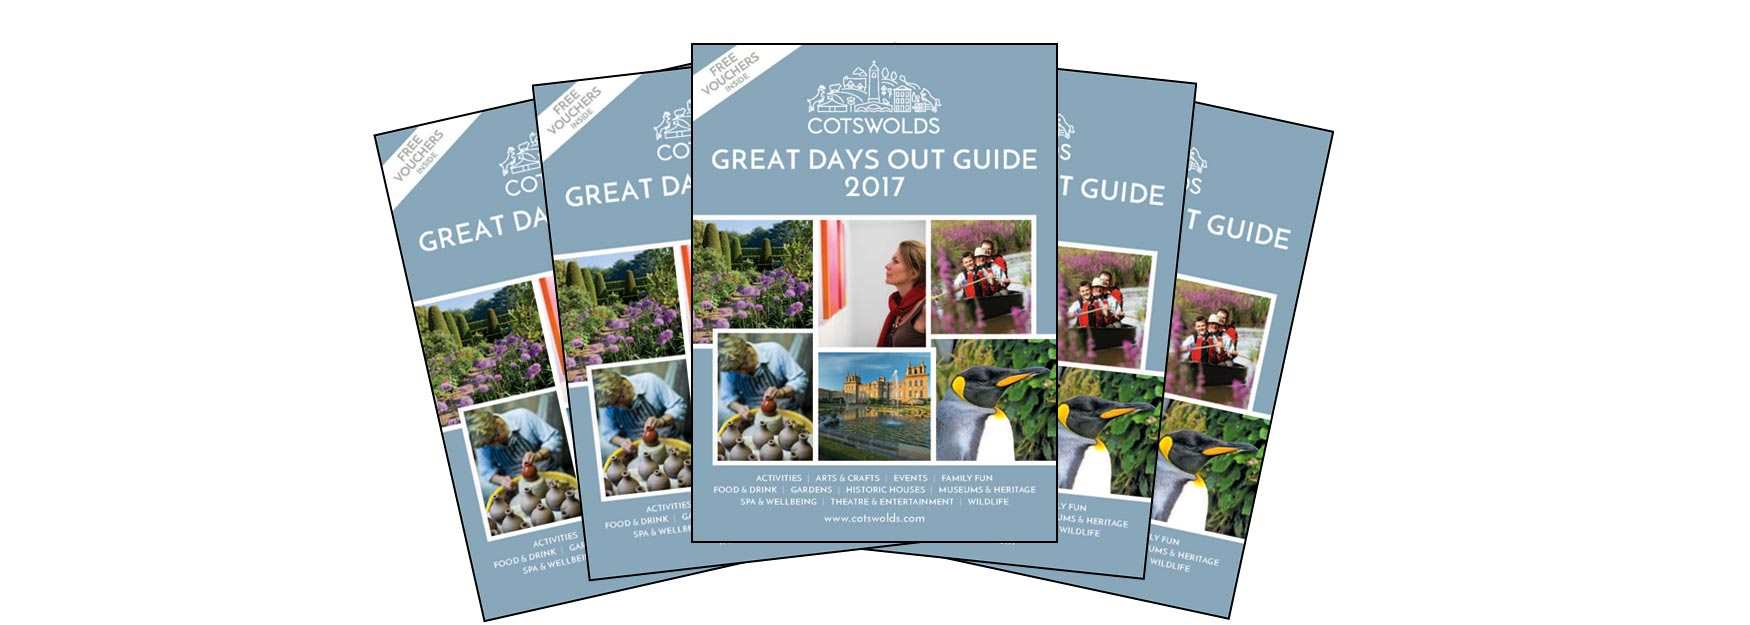 The Great Days Out Guide